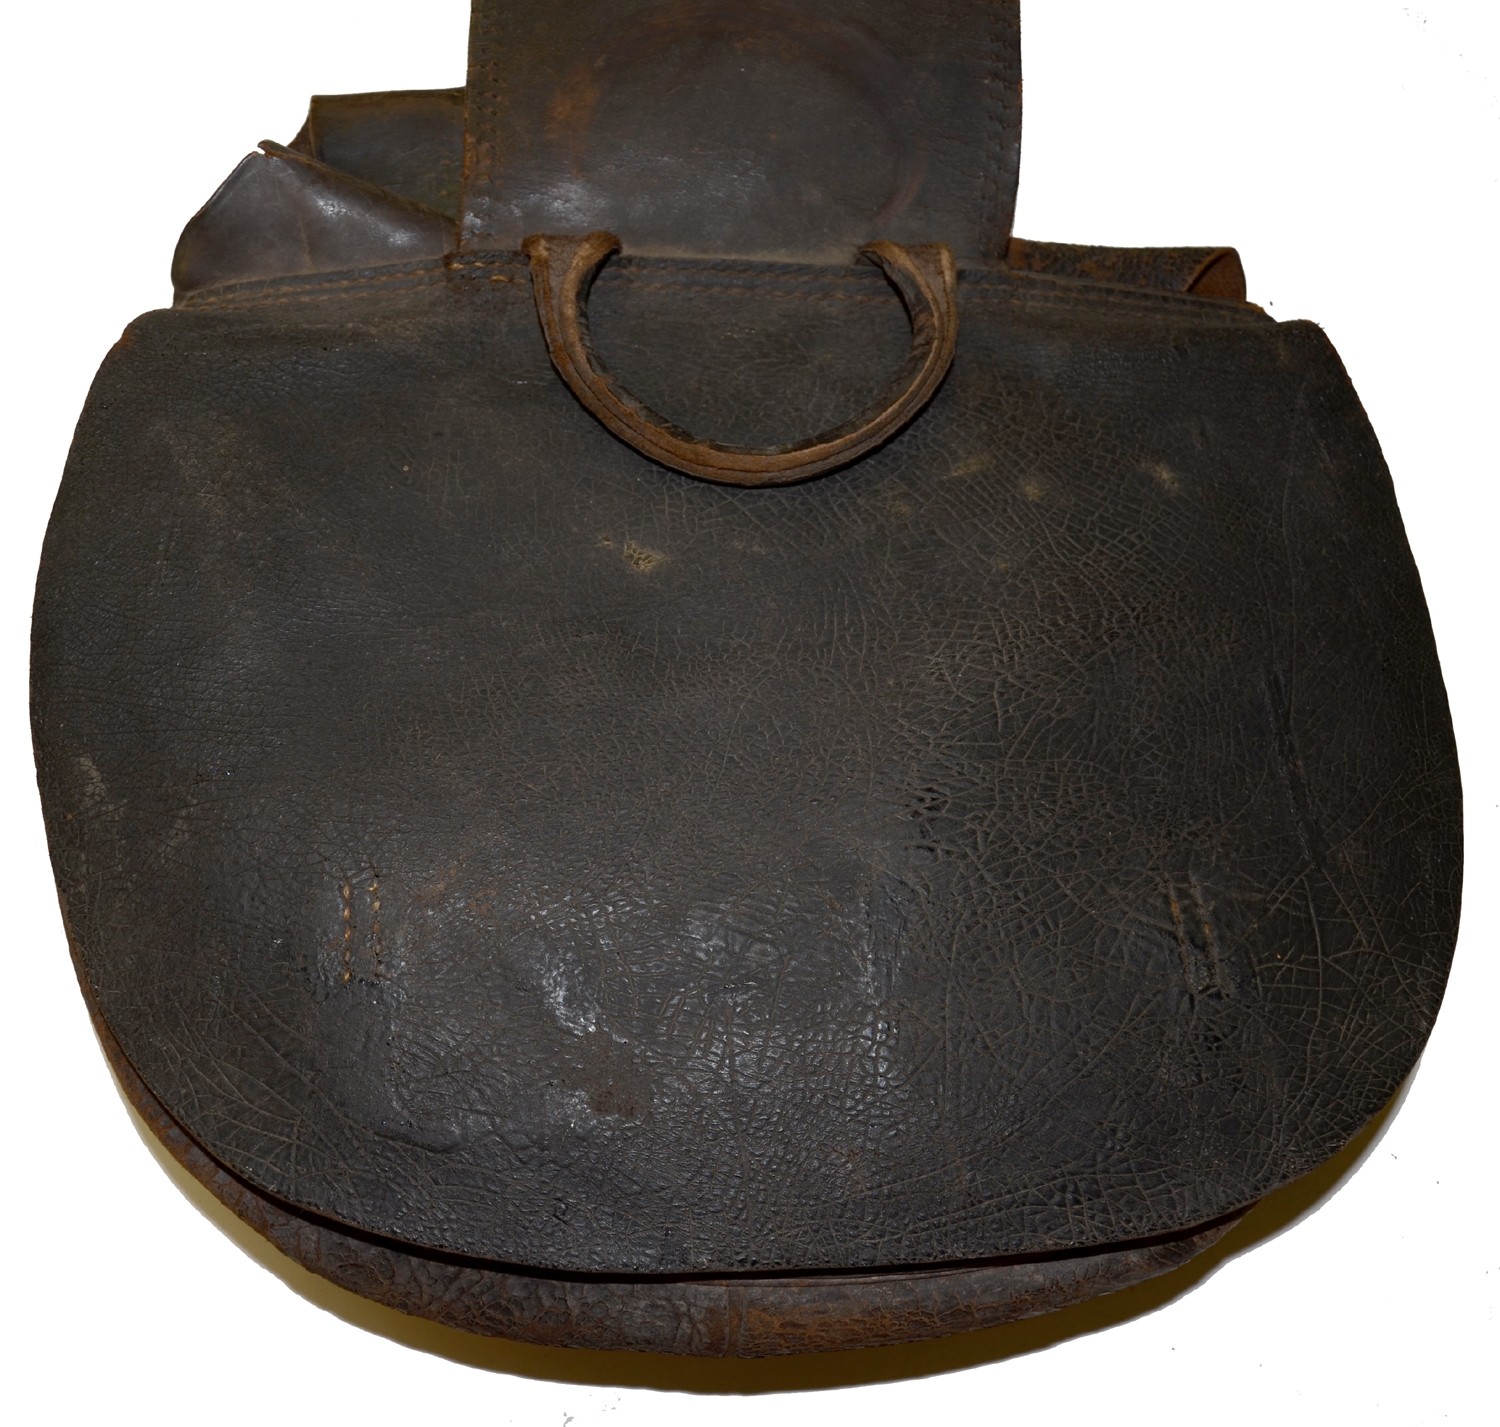 U.S. ARMY SADDLE BAGS DATED 1861 — Horse Soldier